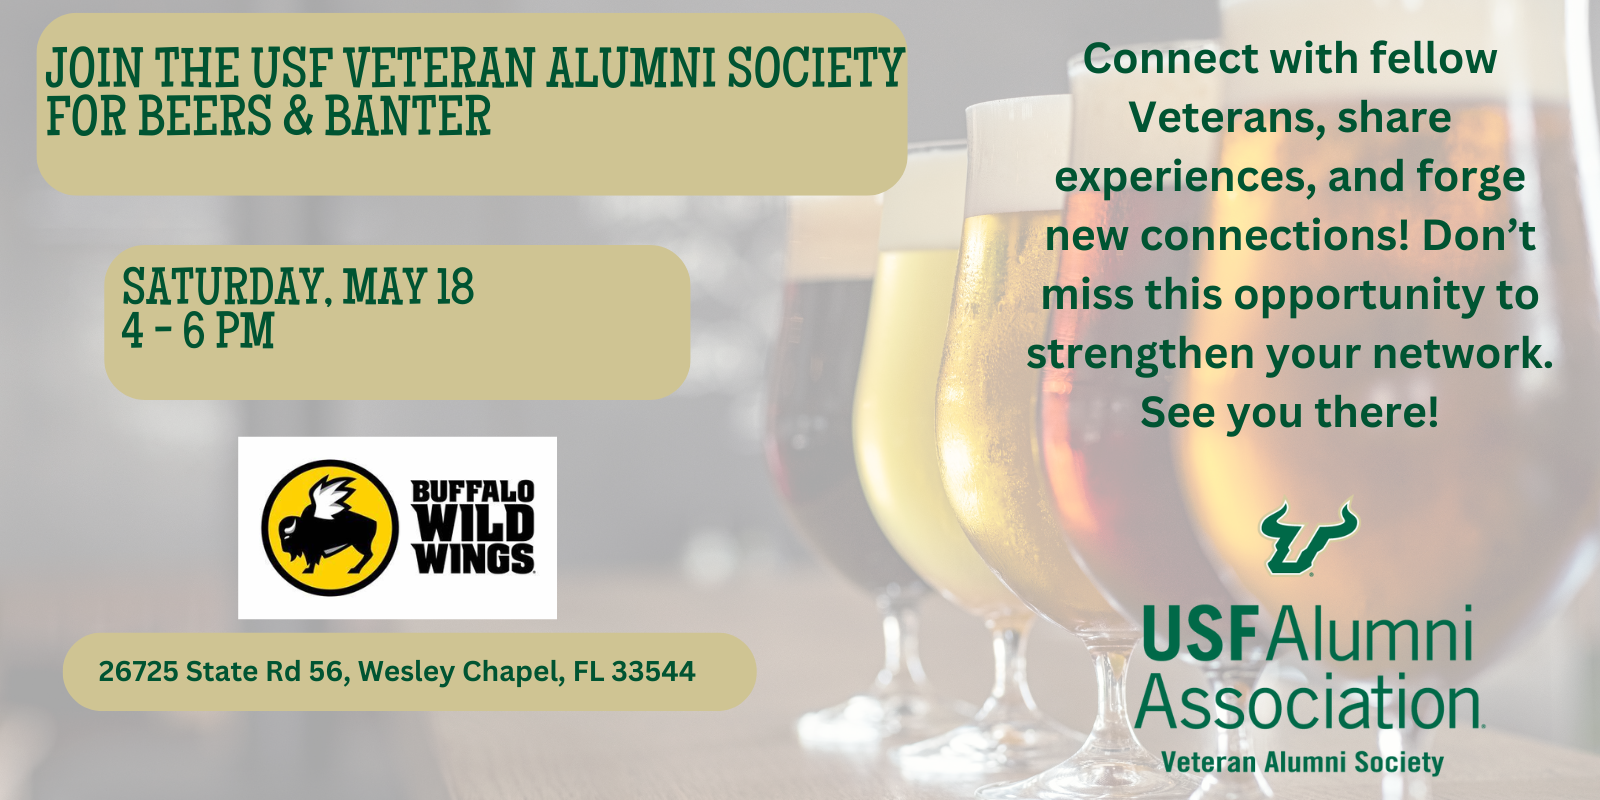 Flyer promoting "Beers and Banter" event hosted by the USF Veteran Alumni Society on May 18